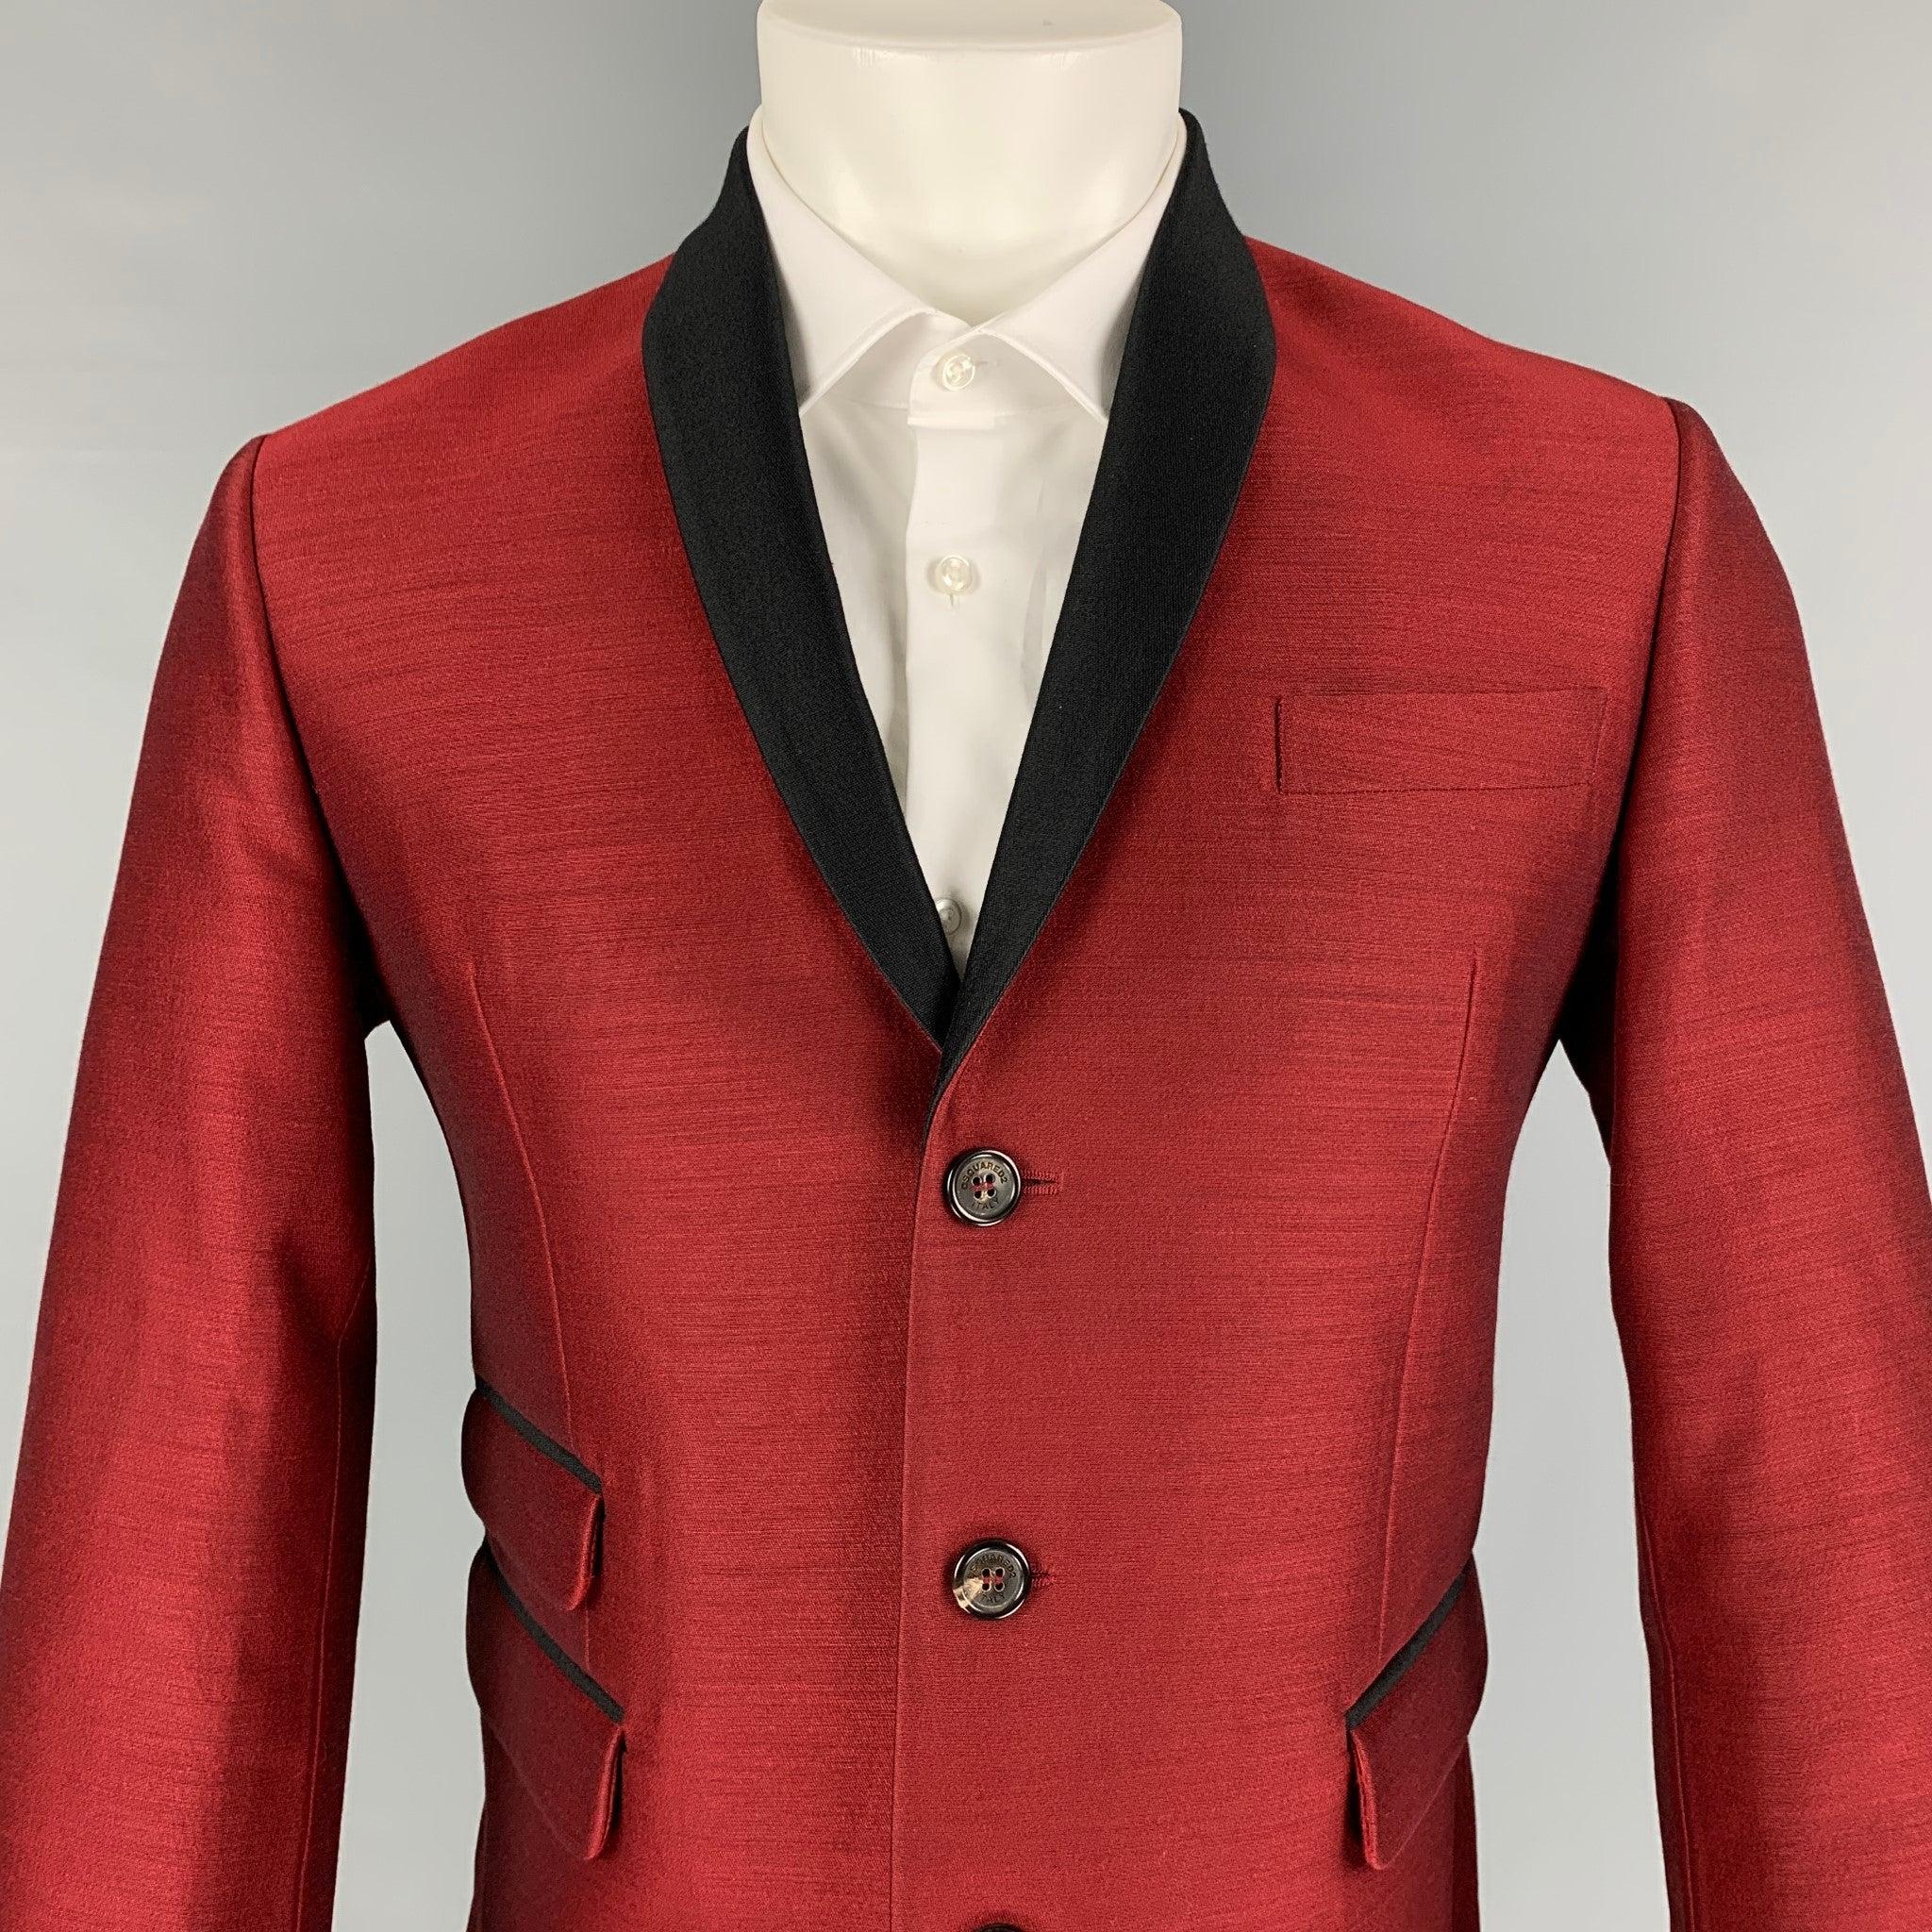 DSQUARED2 sport coat comes in a burgundy & black wool / silk with a full liner featuring a shawl collar, flap pockets, double back vent, and a three button closure. Made in Italy.Very Good
Pre-Owned Condition. 

Marked:   50 

Measurements: 
